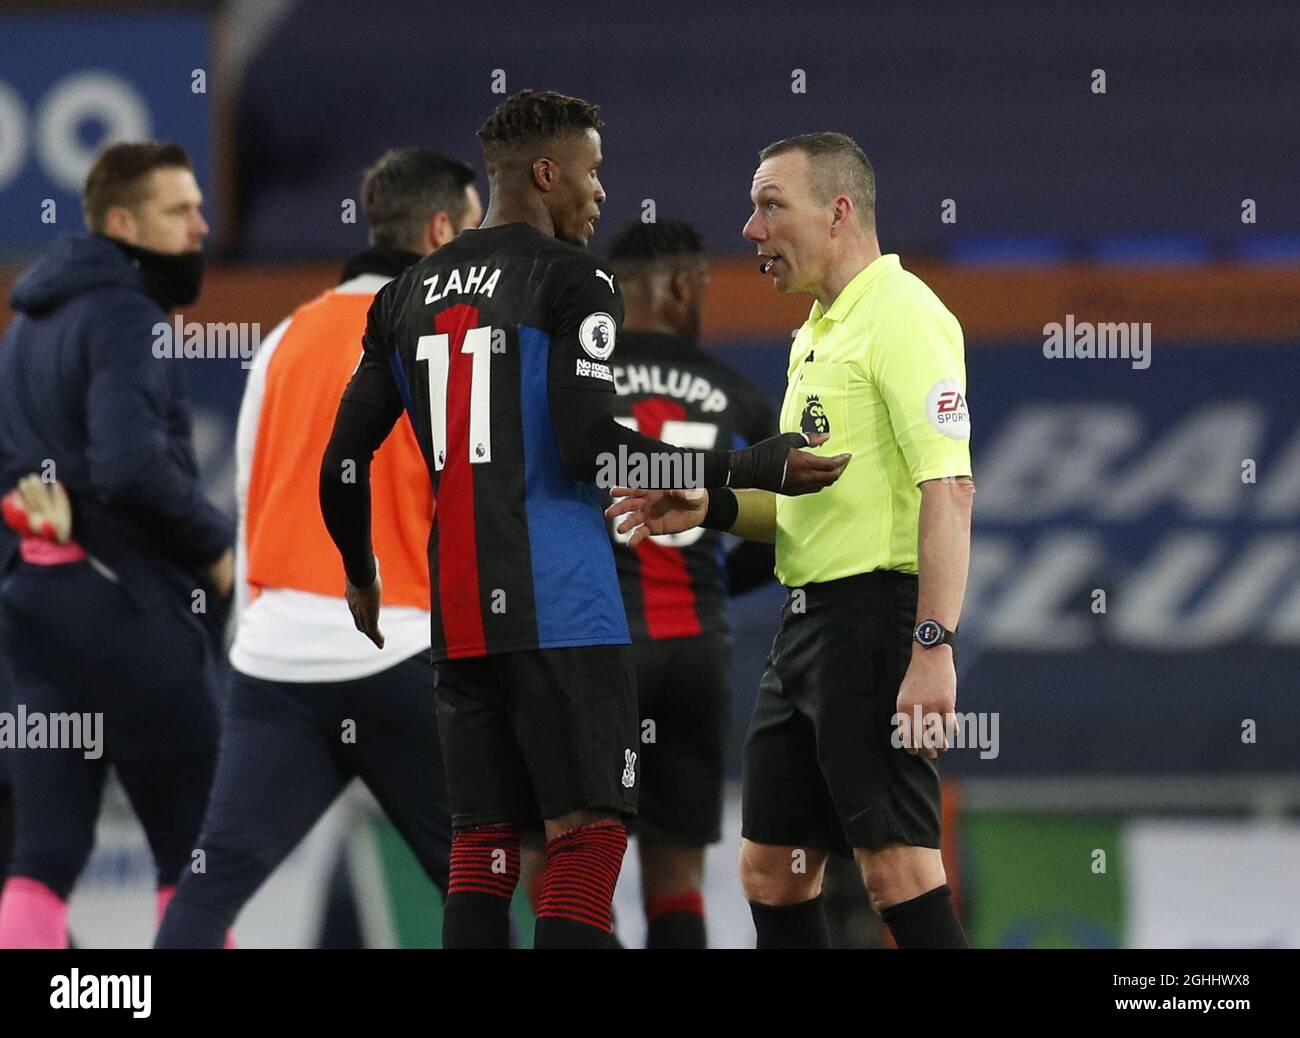 Liverpool, UK, 5th April 2021. Referee Kevin Friend has words with Wilfried Zaha of Crystal Palace after he clashed with Ben Godfrey of Everton on the final whistle during the Premier League match at Goodison Park, Liverpool. Picture date: 5th April 2021. Picture credit should read: Darren Staples/Sportimage via PA Images Stock Photo